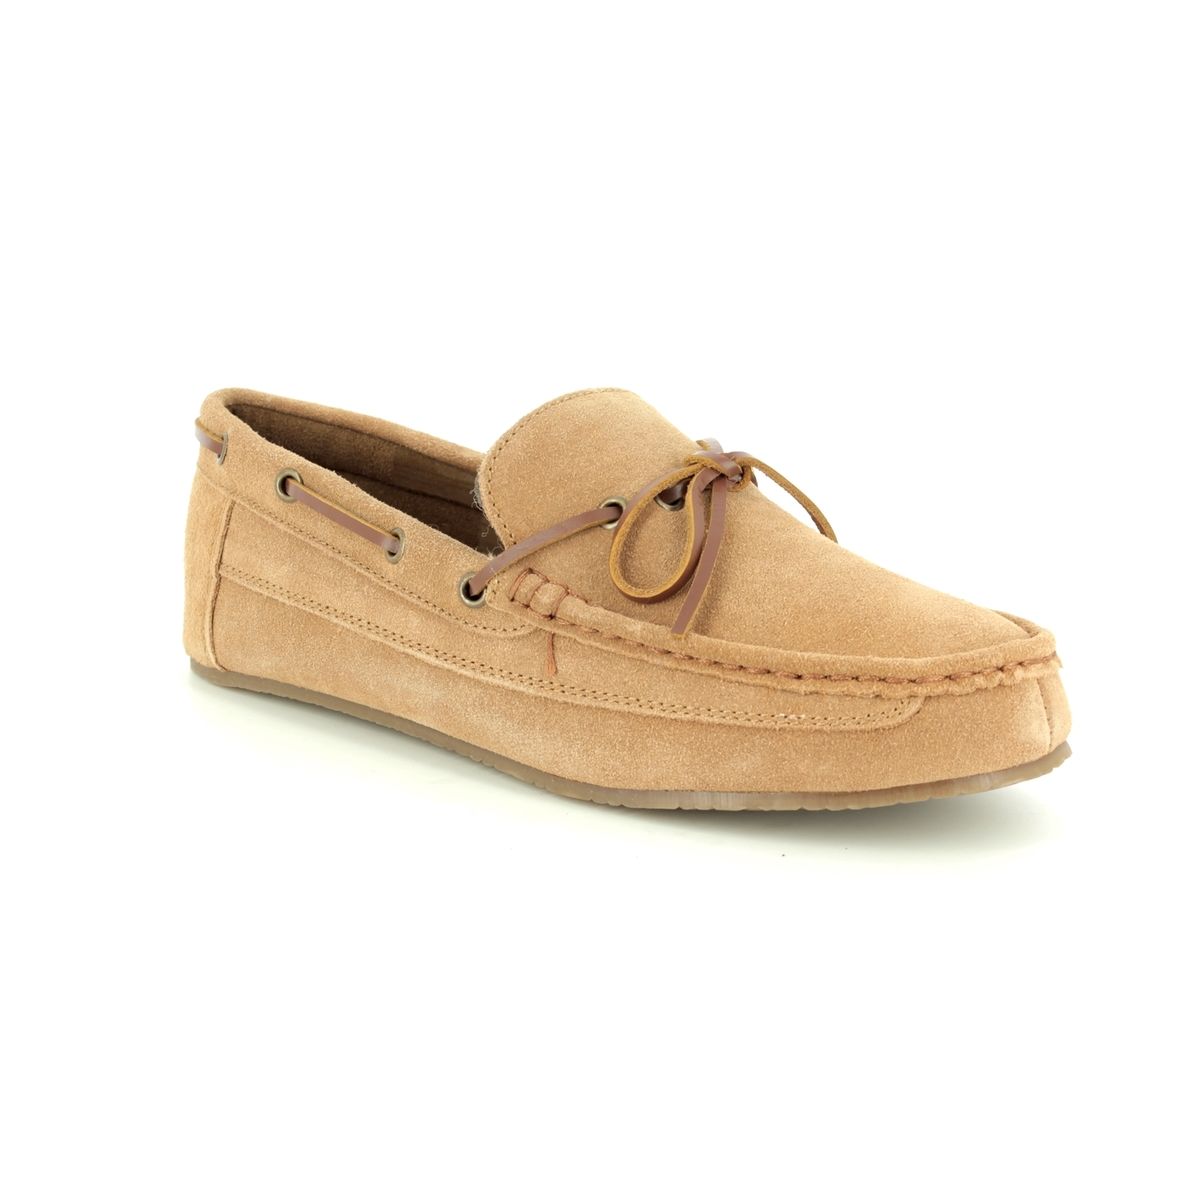 Clarks Crackling Glow G Fit Tan Suede 